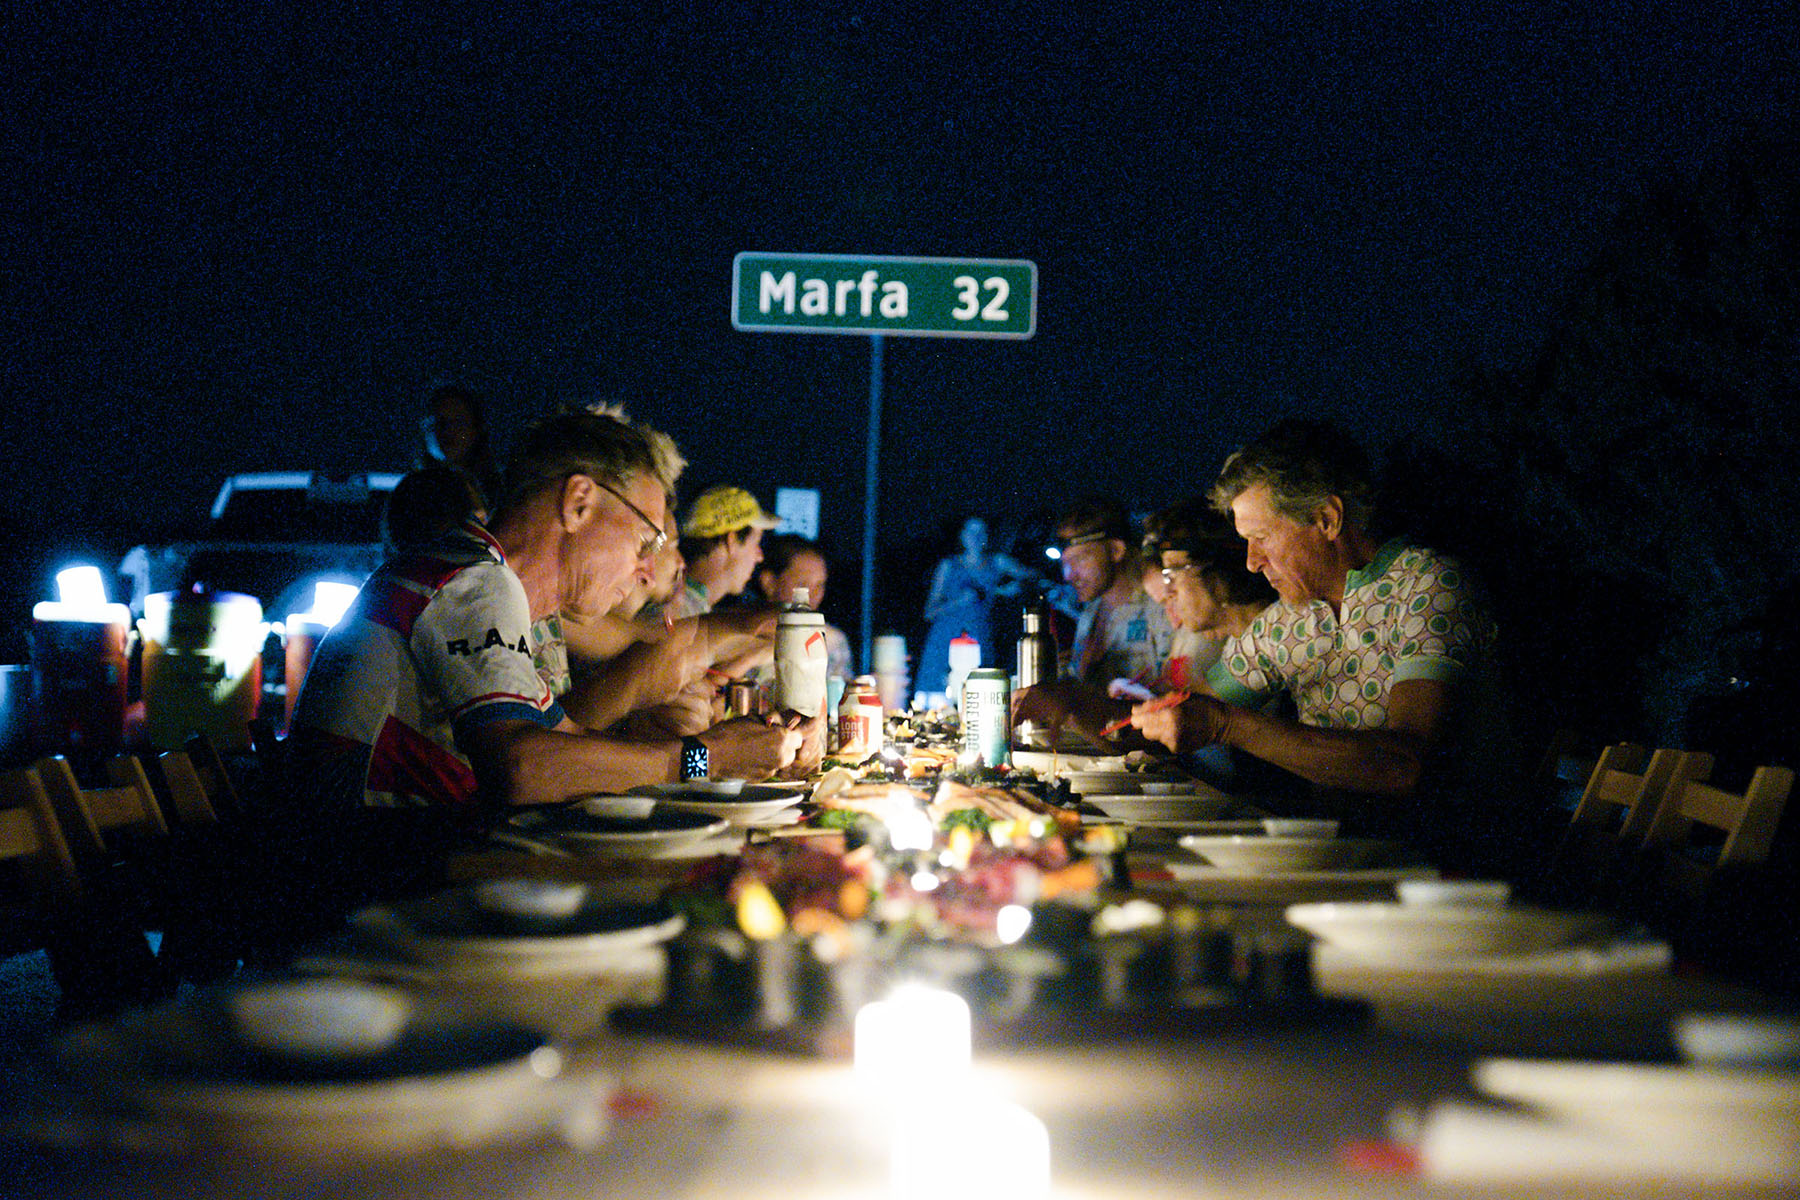 A group of people eat sushi at dark at a table with lights down the center and a sign reading 